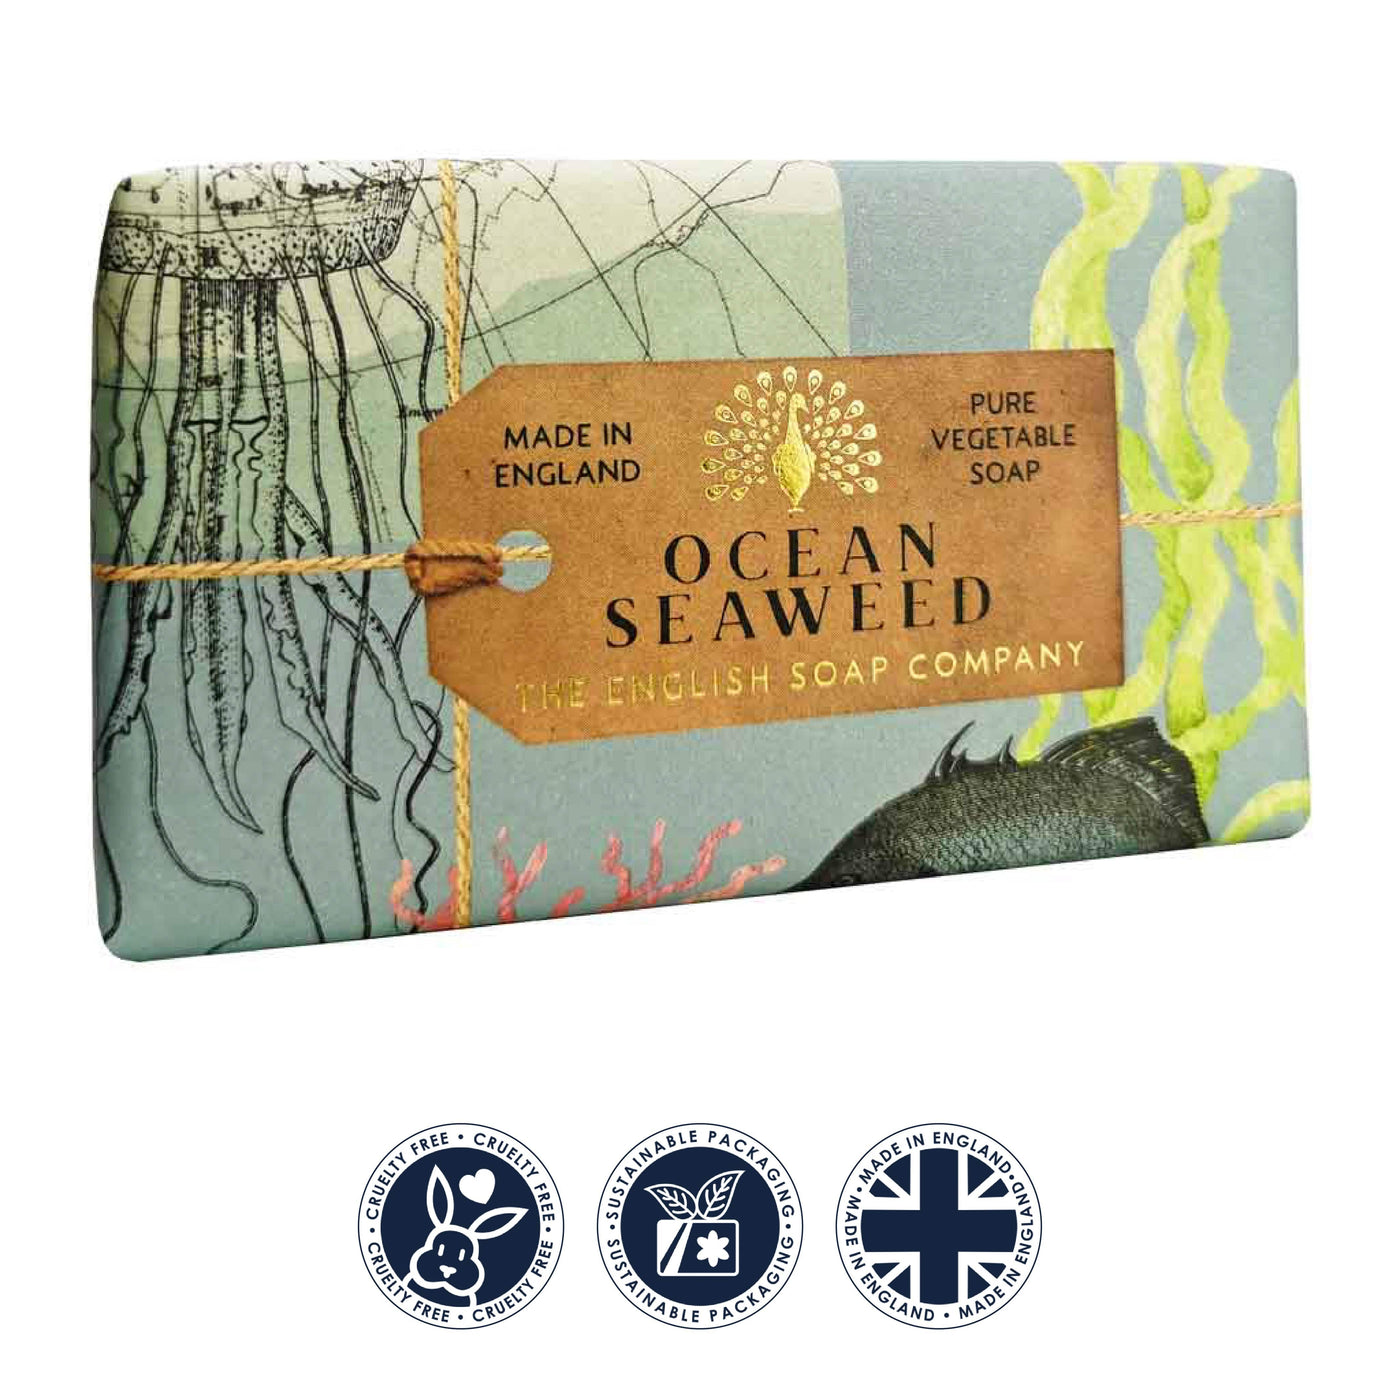 Anniversary Ocean Seaweed Soap Bar from our Luxury Bar Soap collection by The English Soap Company